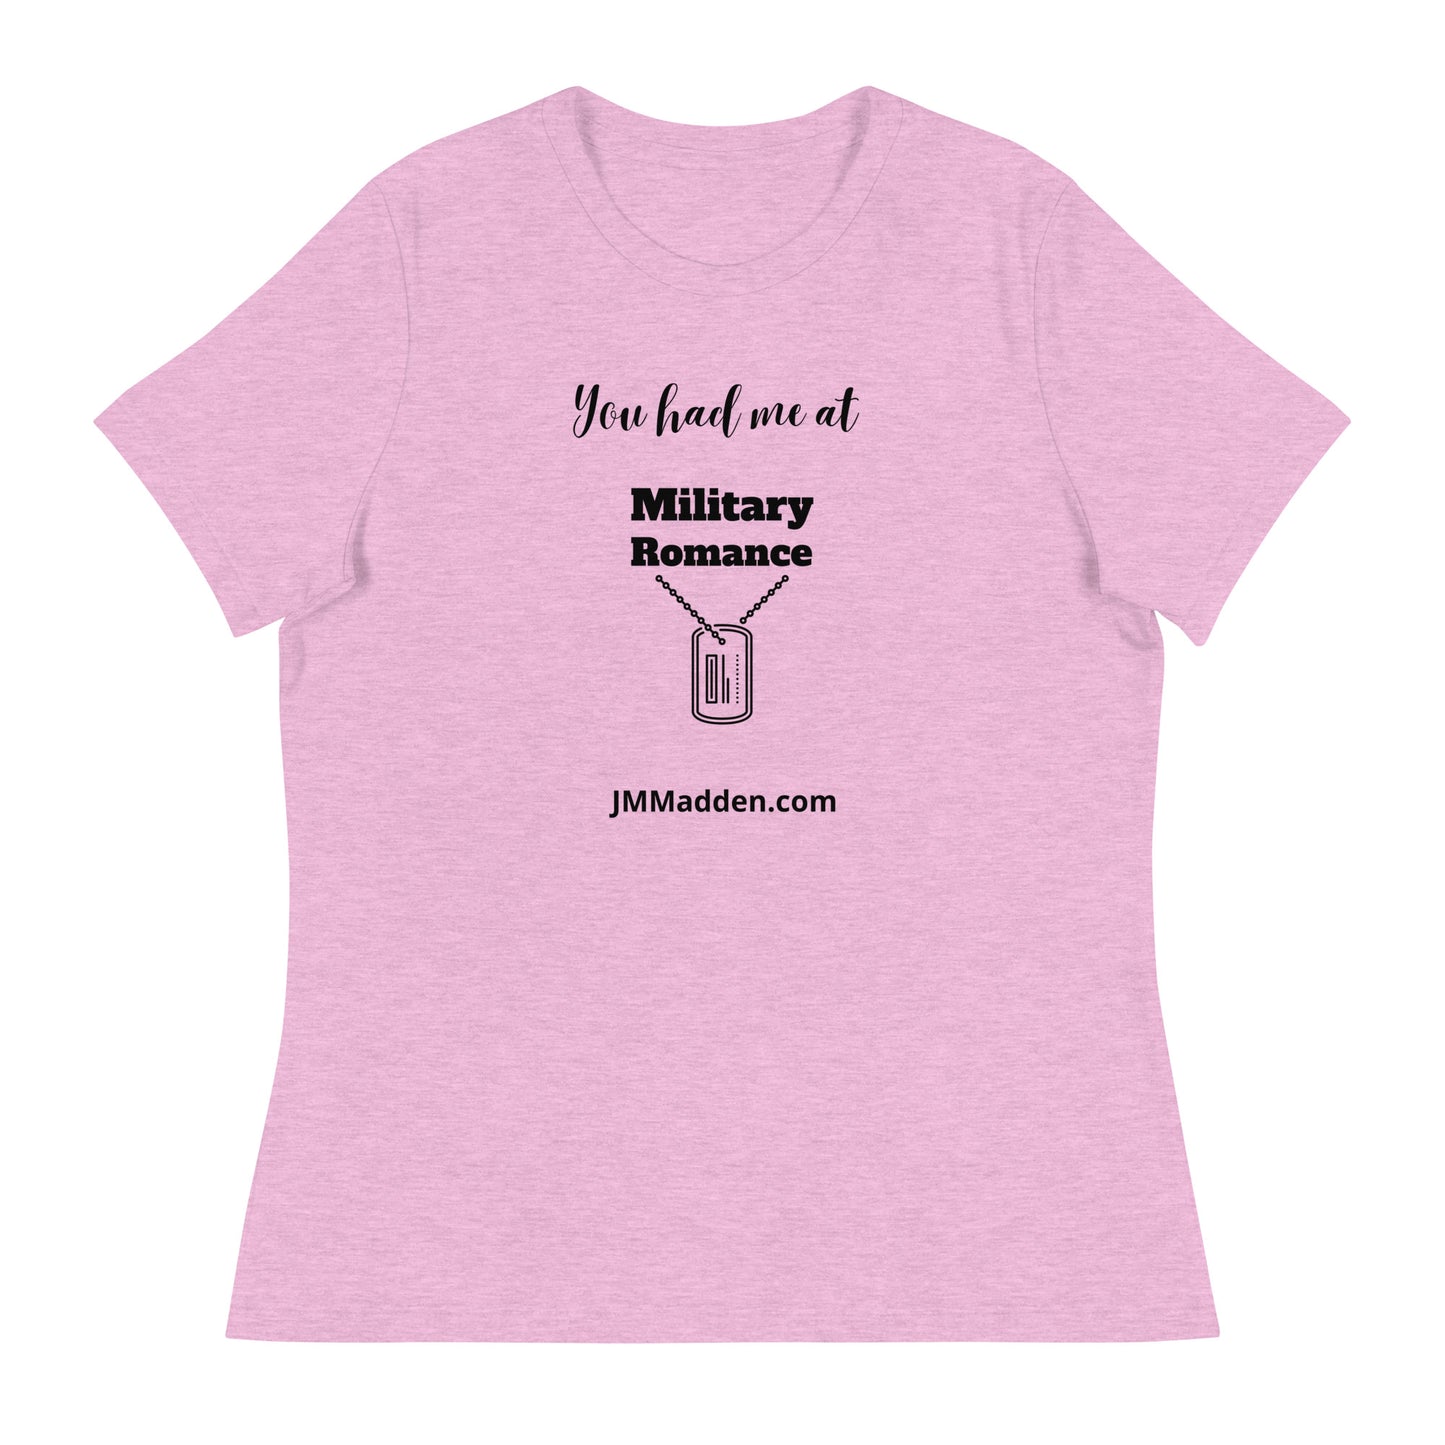 Women's Relaxed T-Shirt You had me at military romance